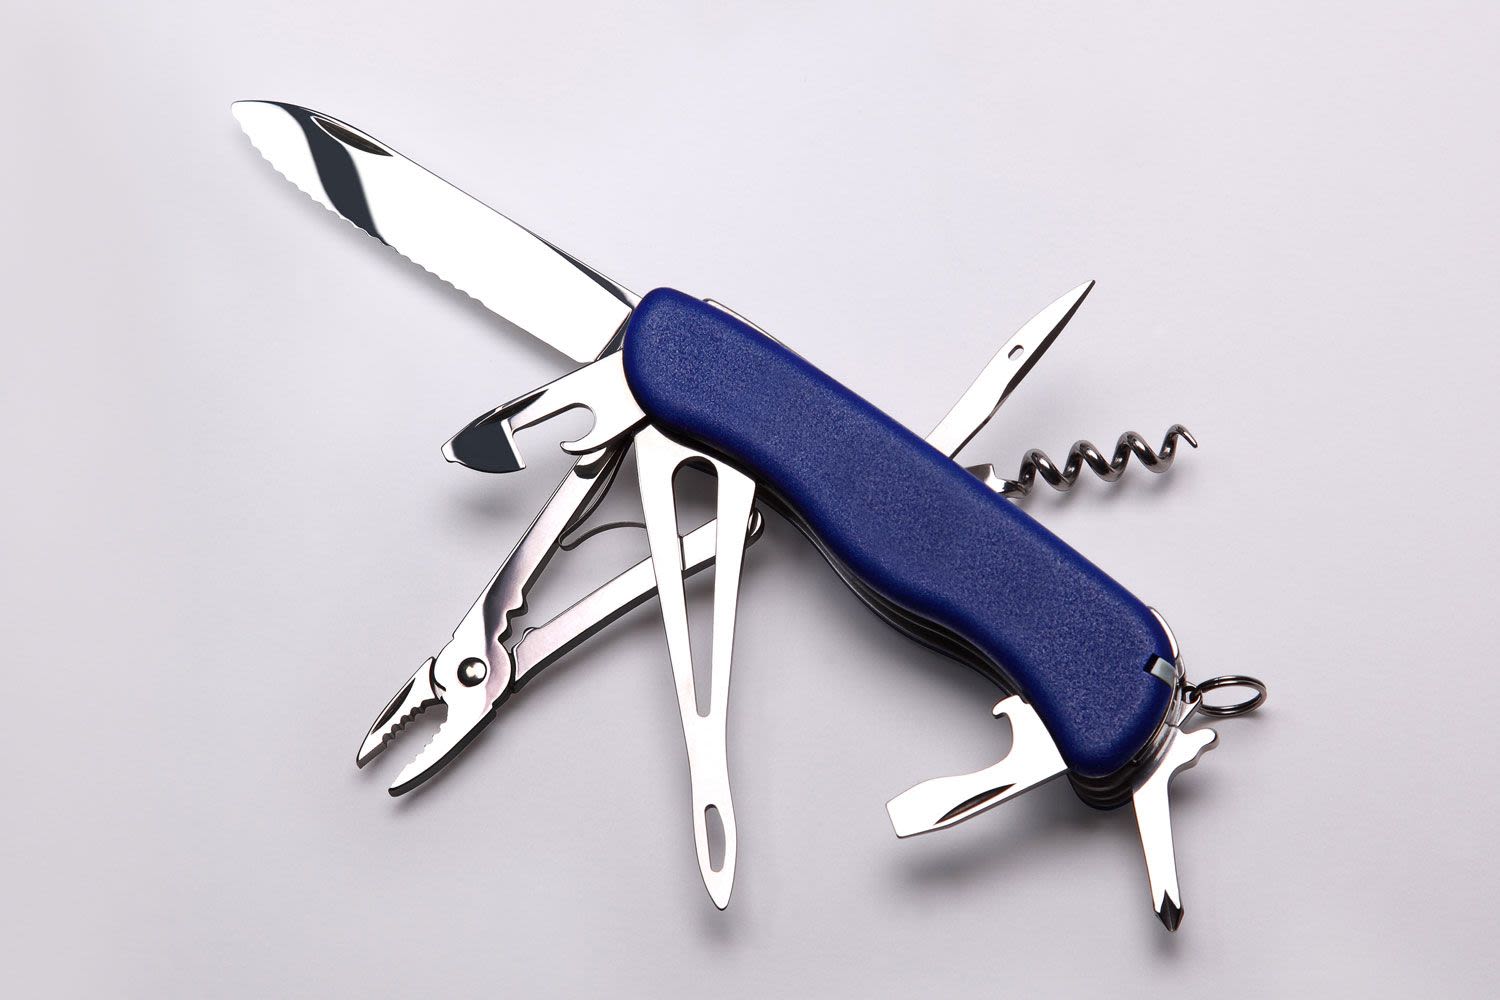 Swiss Army Knife Maker Working on New Range Without Blades – Here’s Why